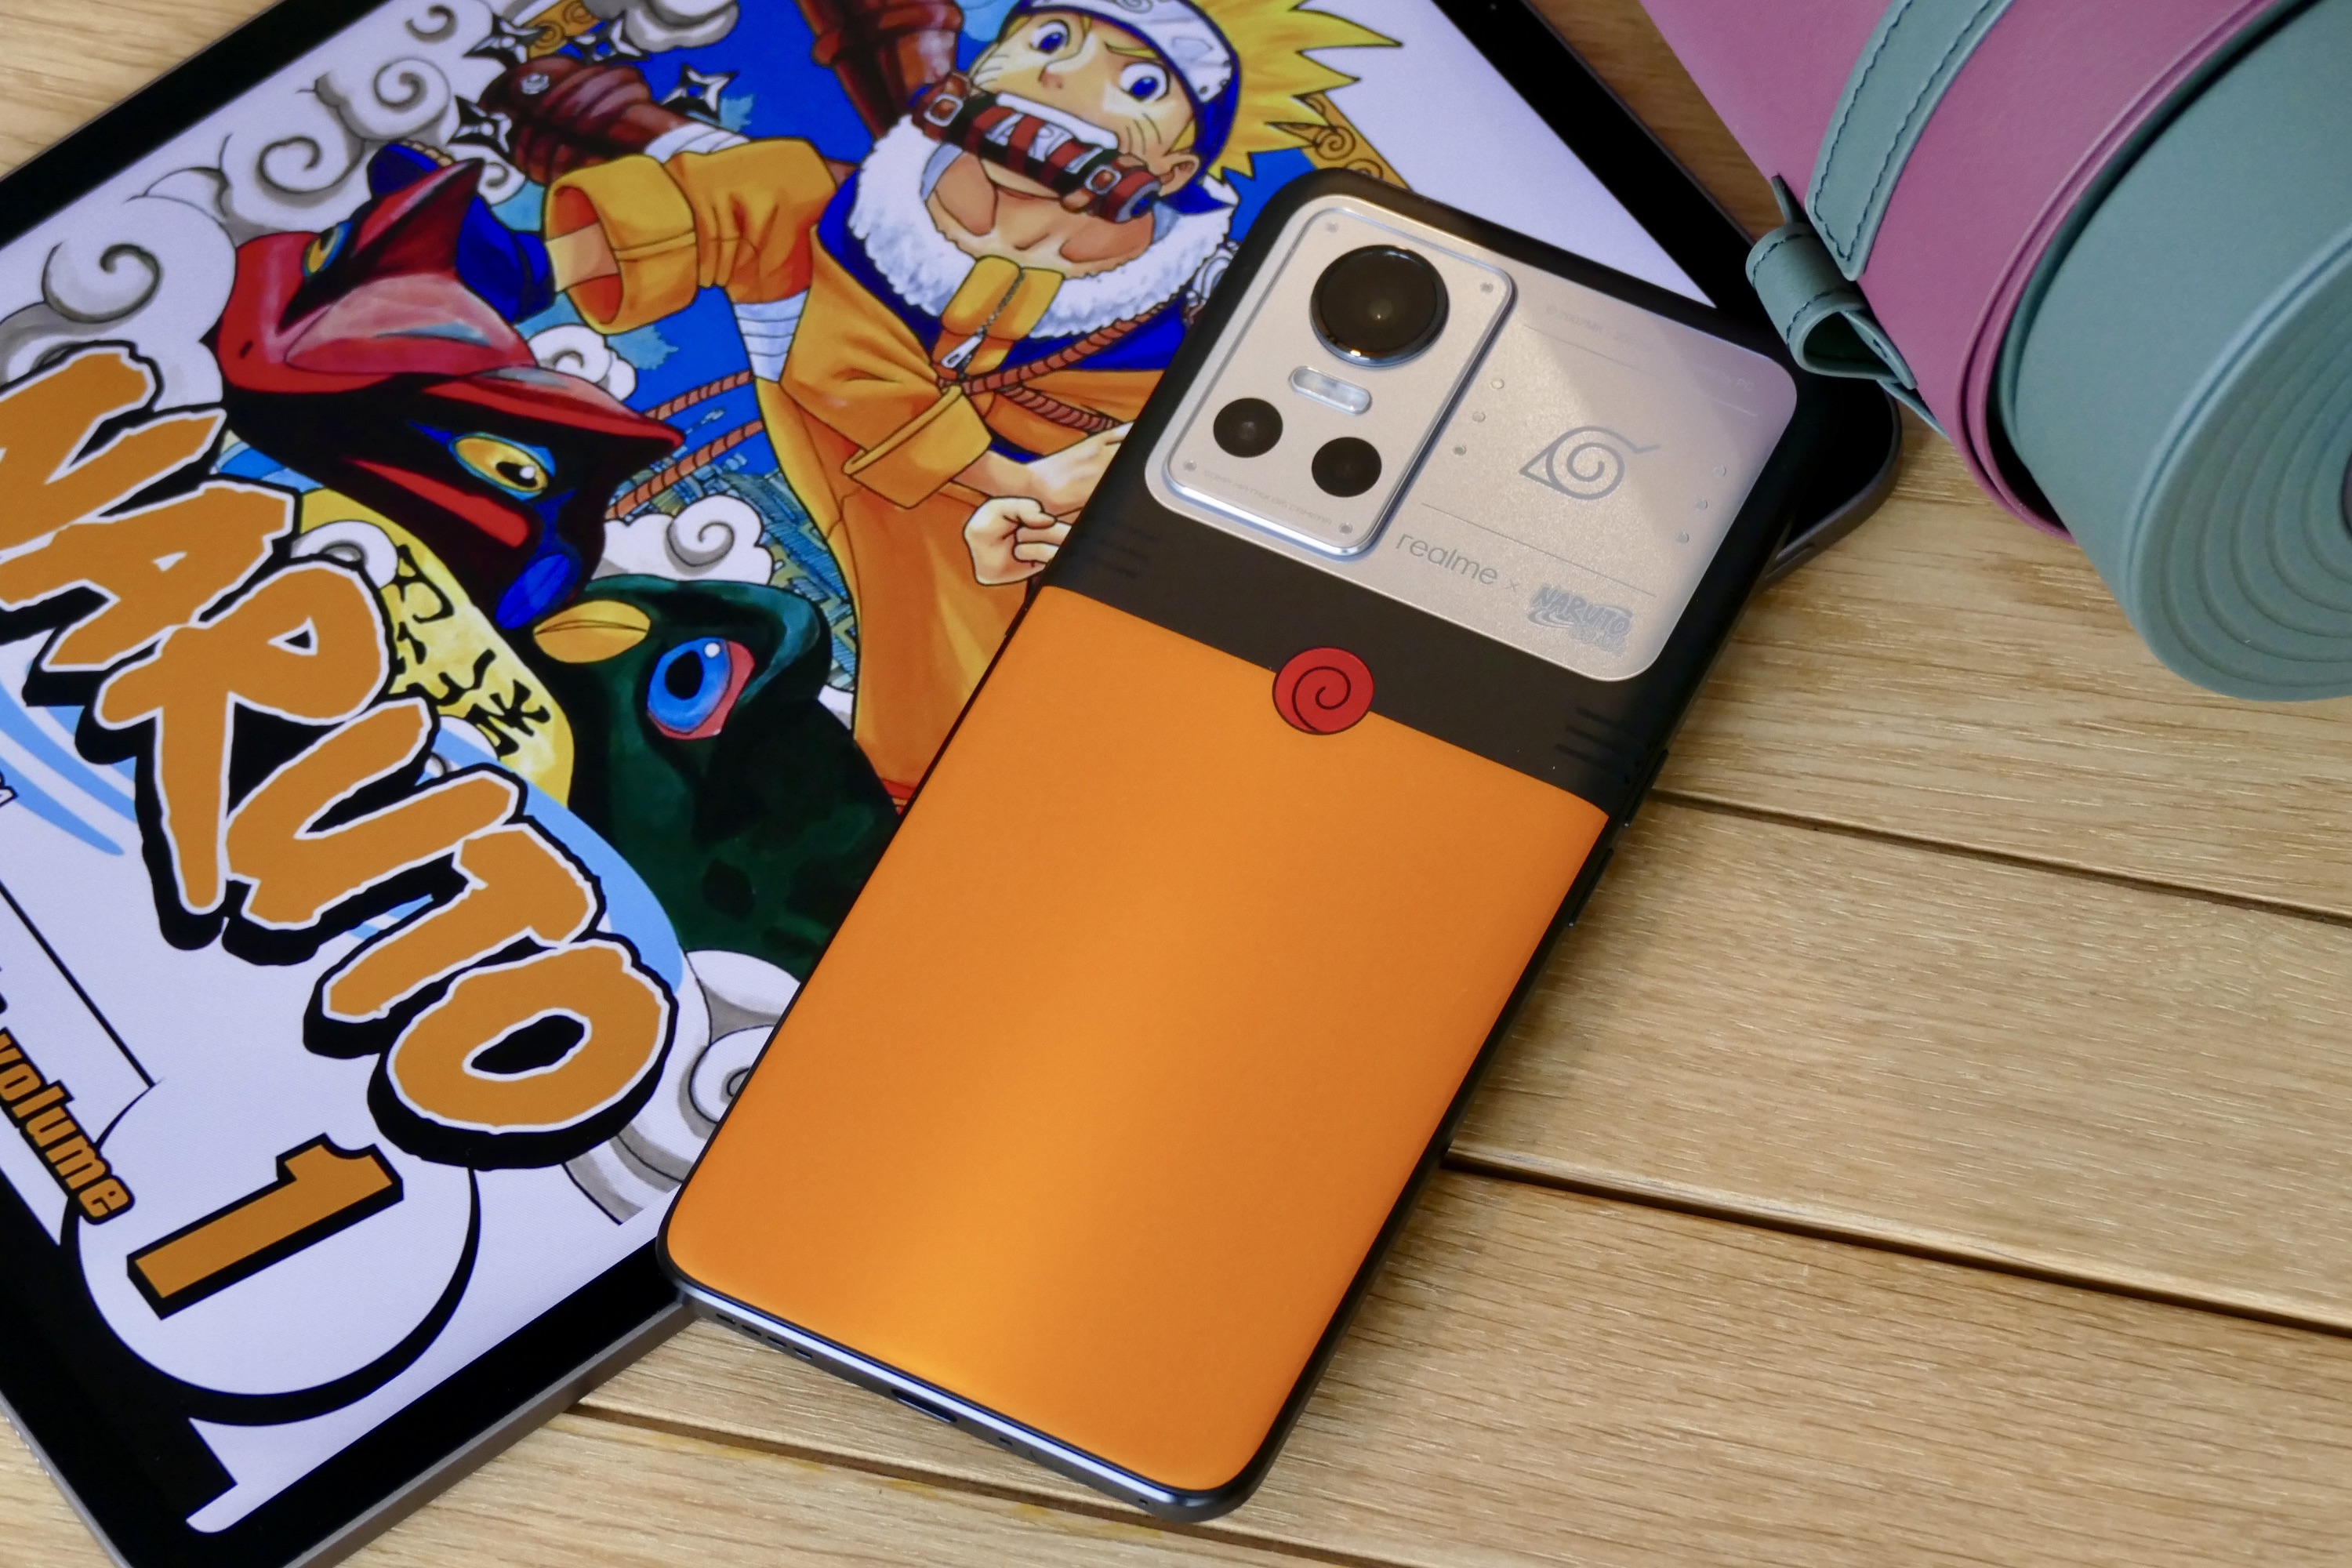 Realme GT Neo 2 Dragon Ball Z Limited Edition may launch in India soon